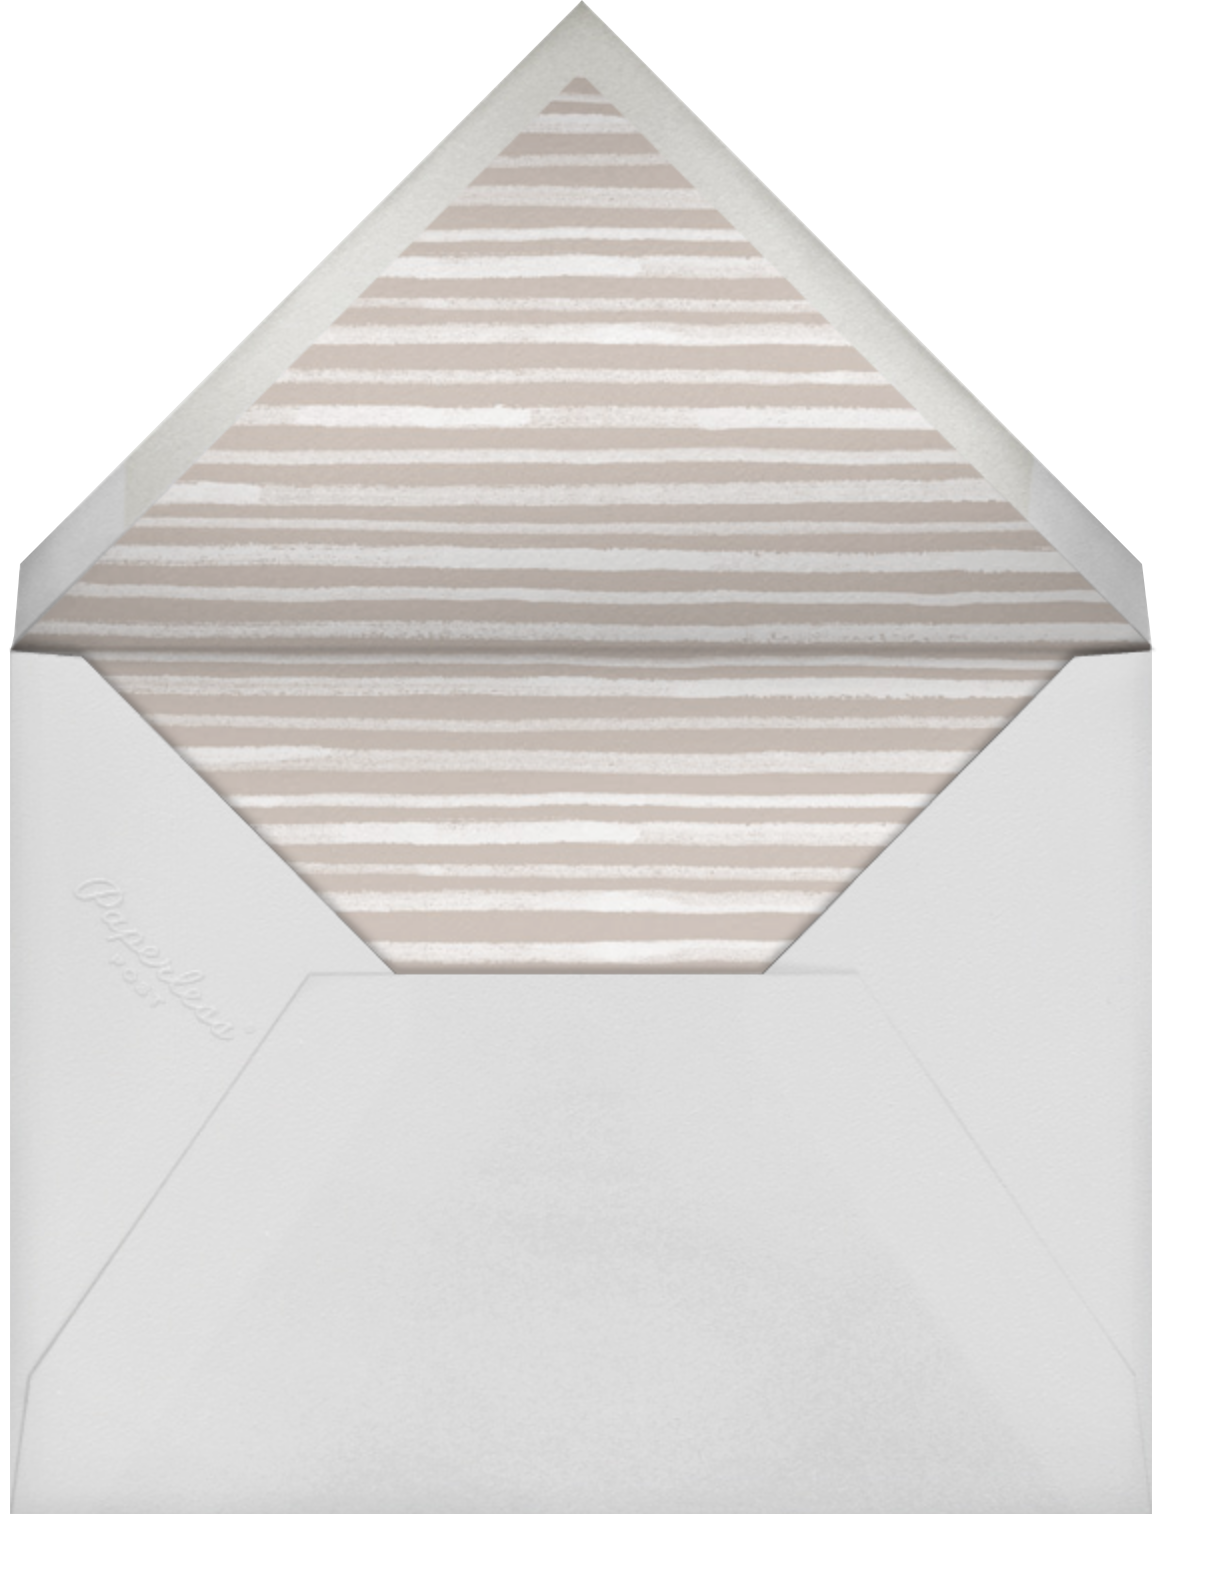 Tropical Palm - White - Paperless Post - Envelope